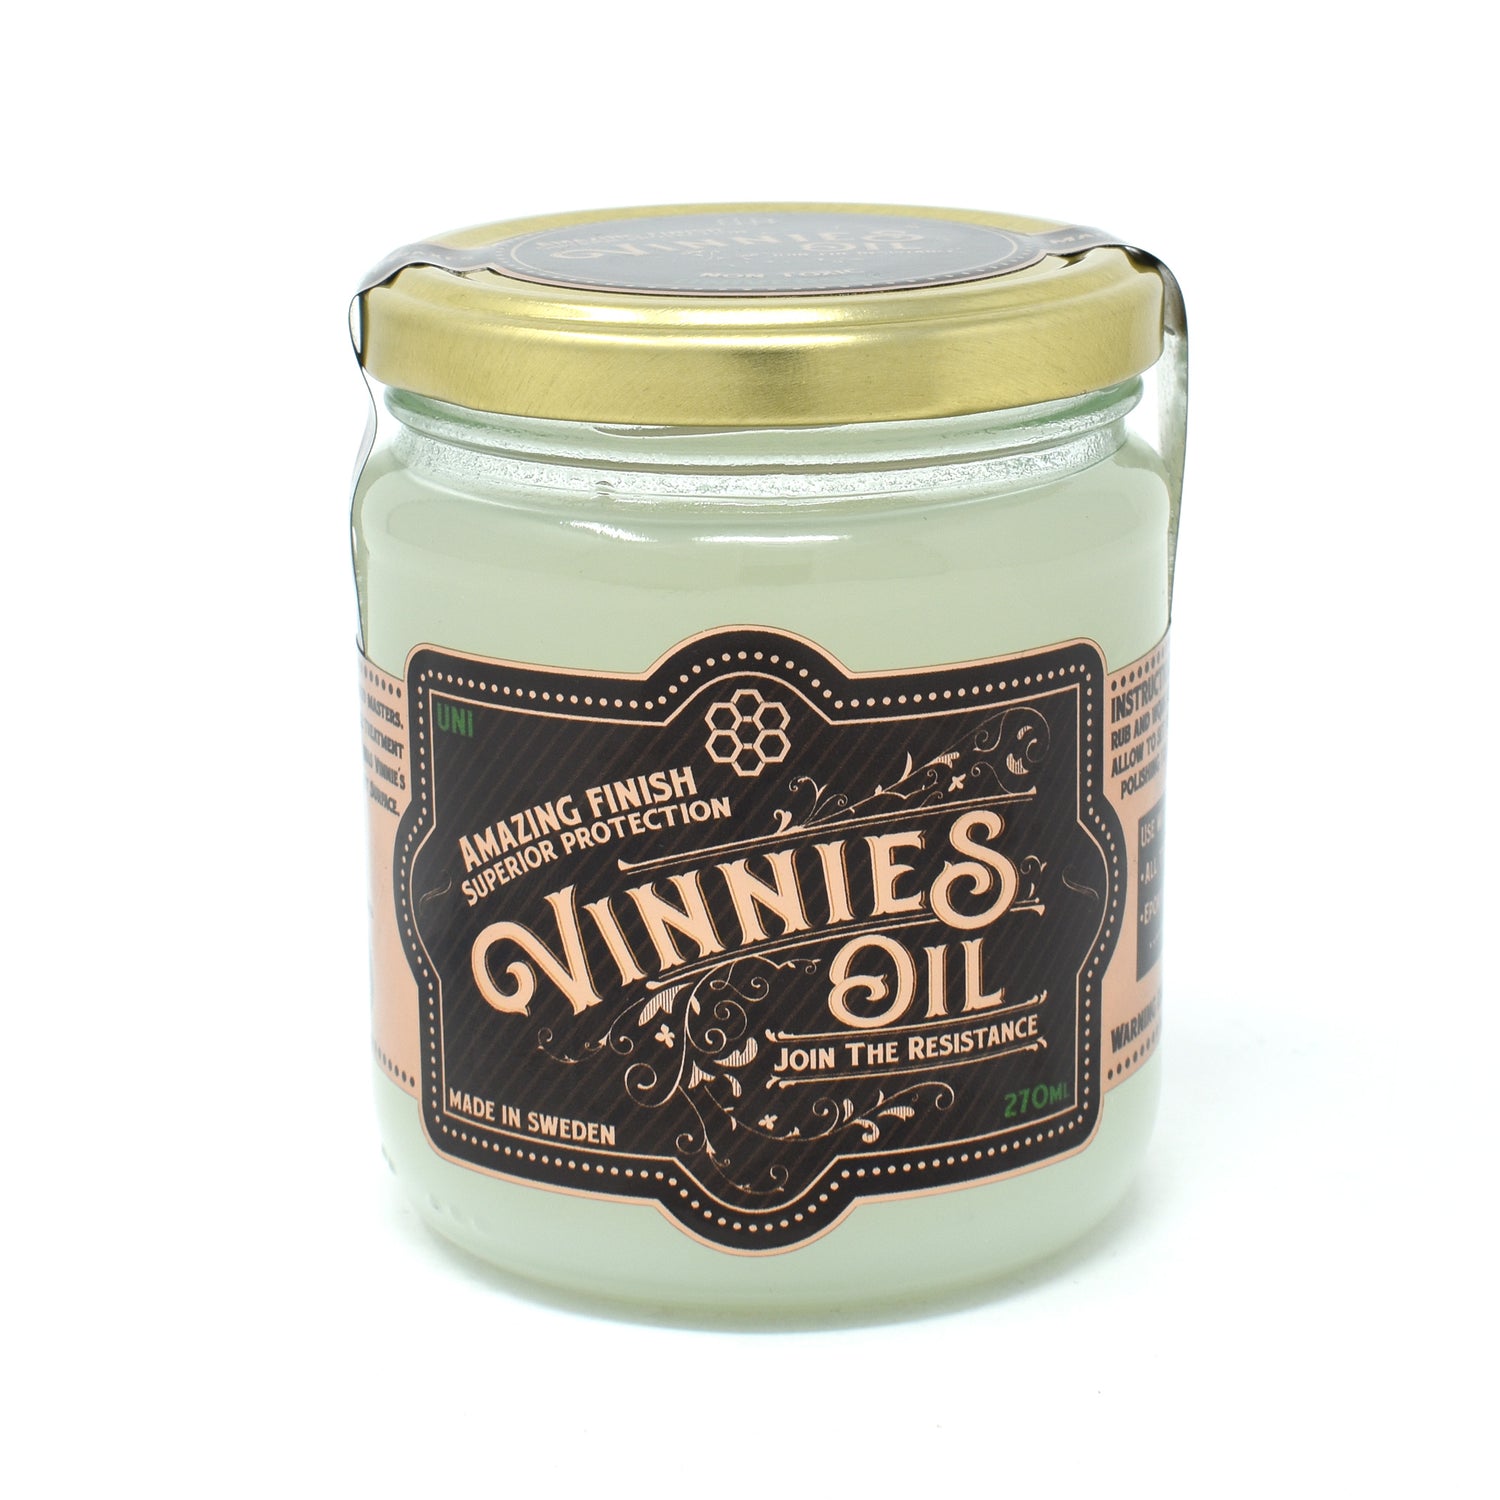 How to use Vinnies's Oil Universal?